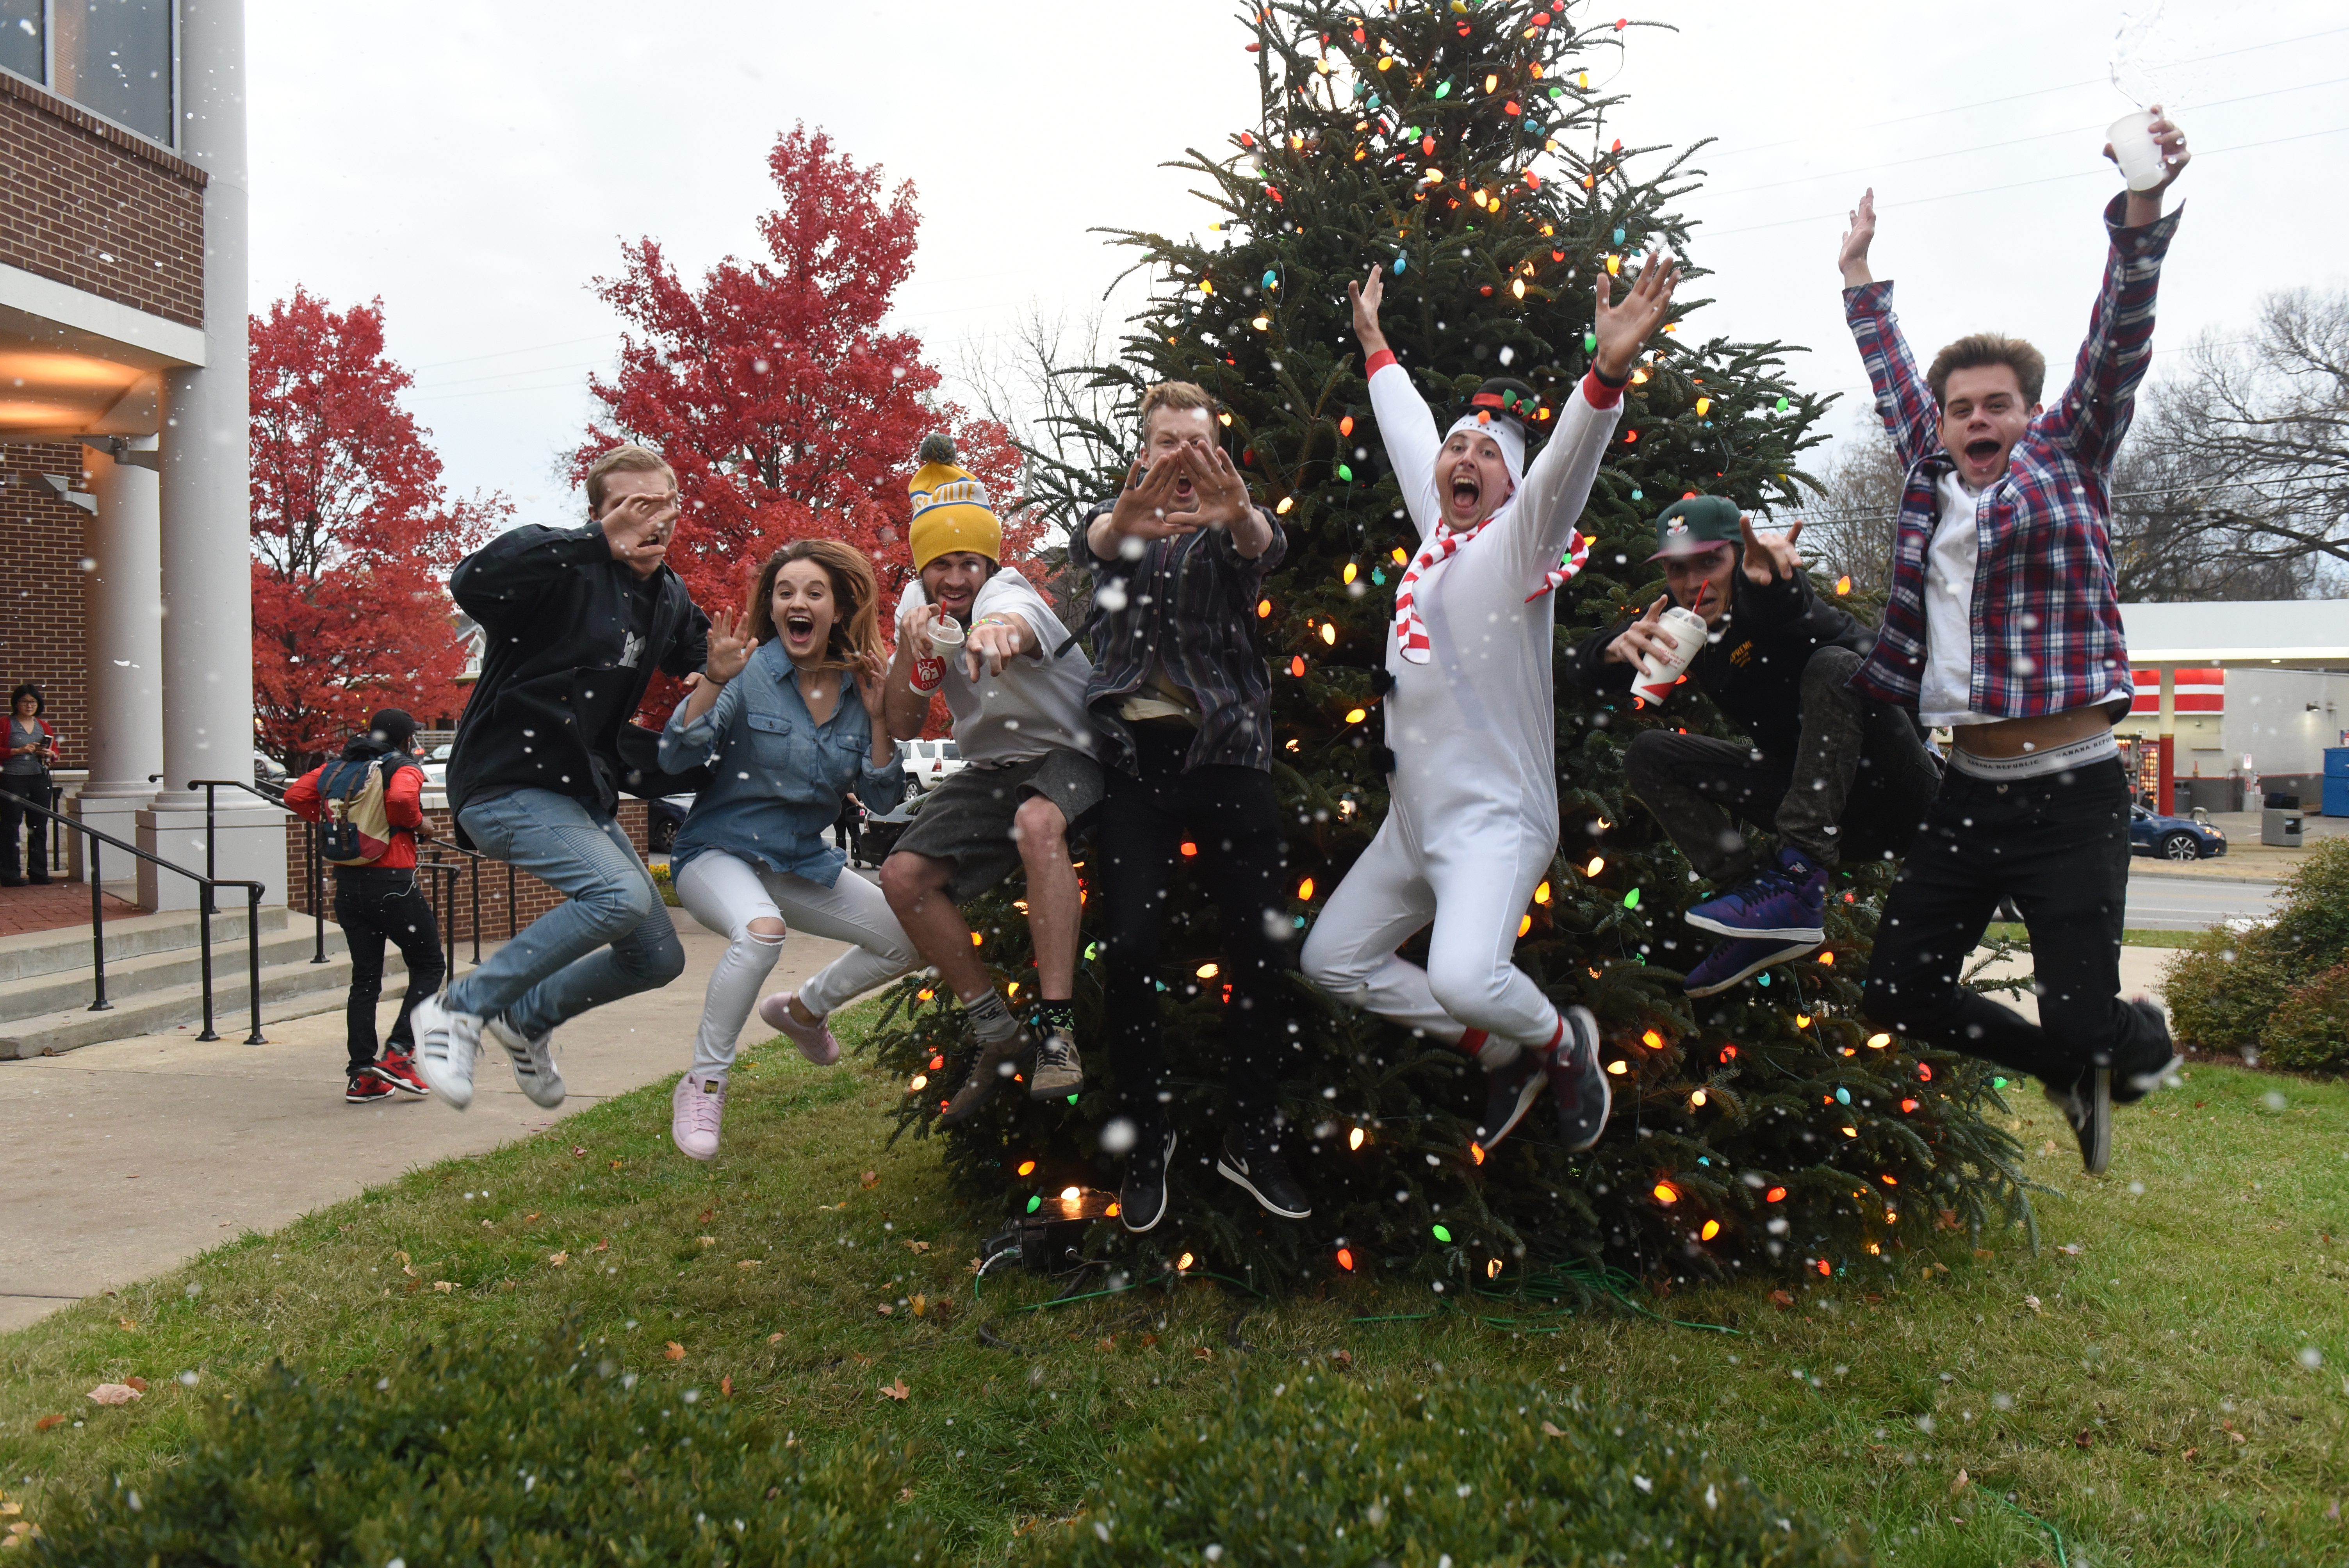 Students jump in front of the Christmas Tree at Blizzard on the Blvd.